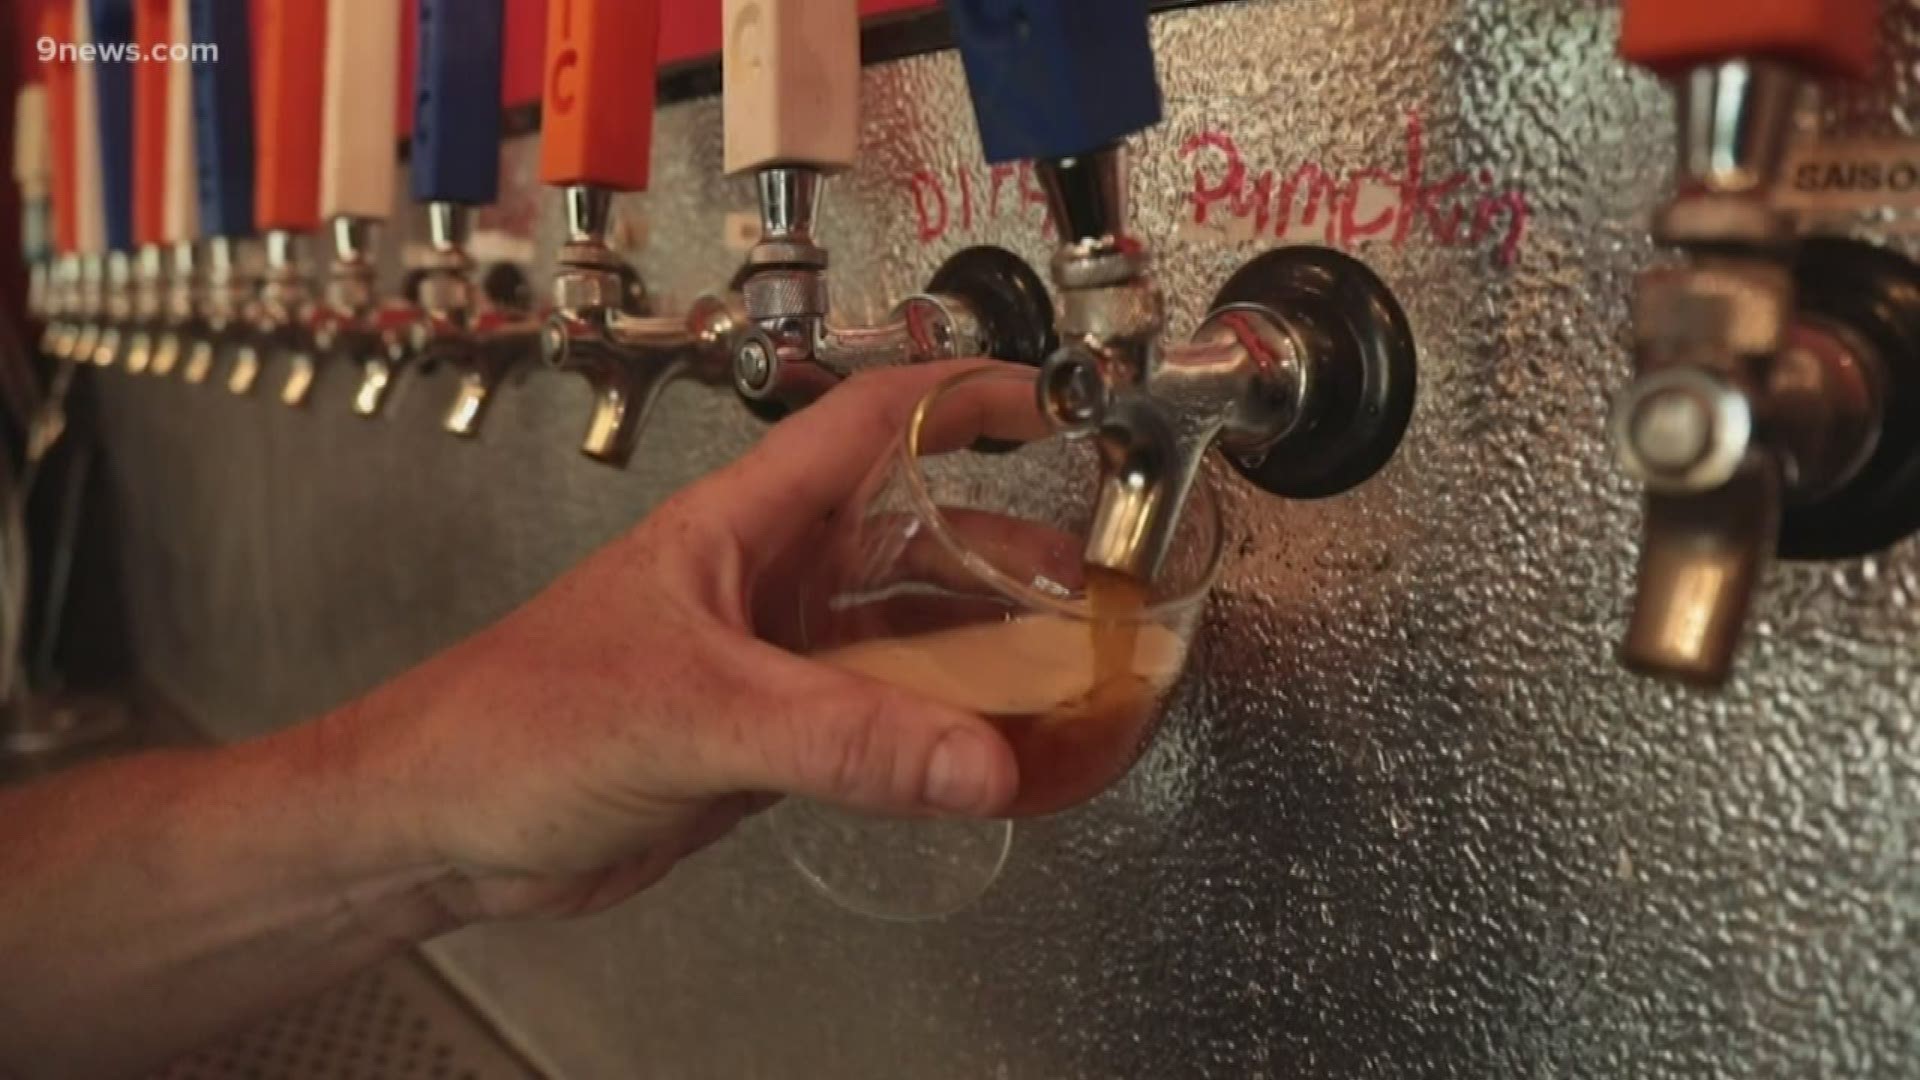 It's that time of year! Pumpkin Beer is brewing across the Front Range, so Kylie Bearse tasted the batch at Frolic Brewing in Westminster.